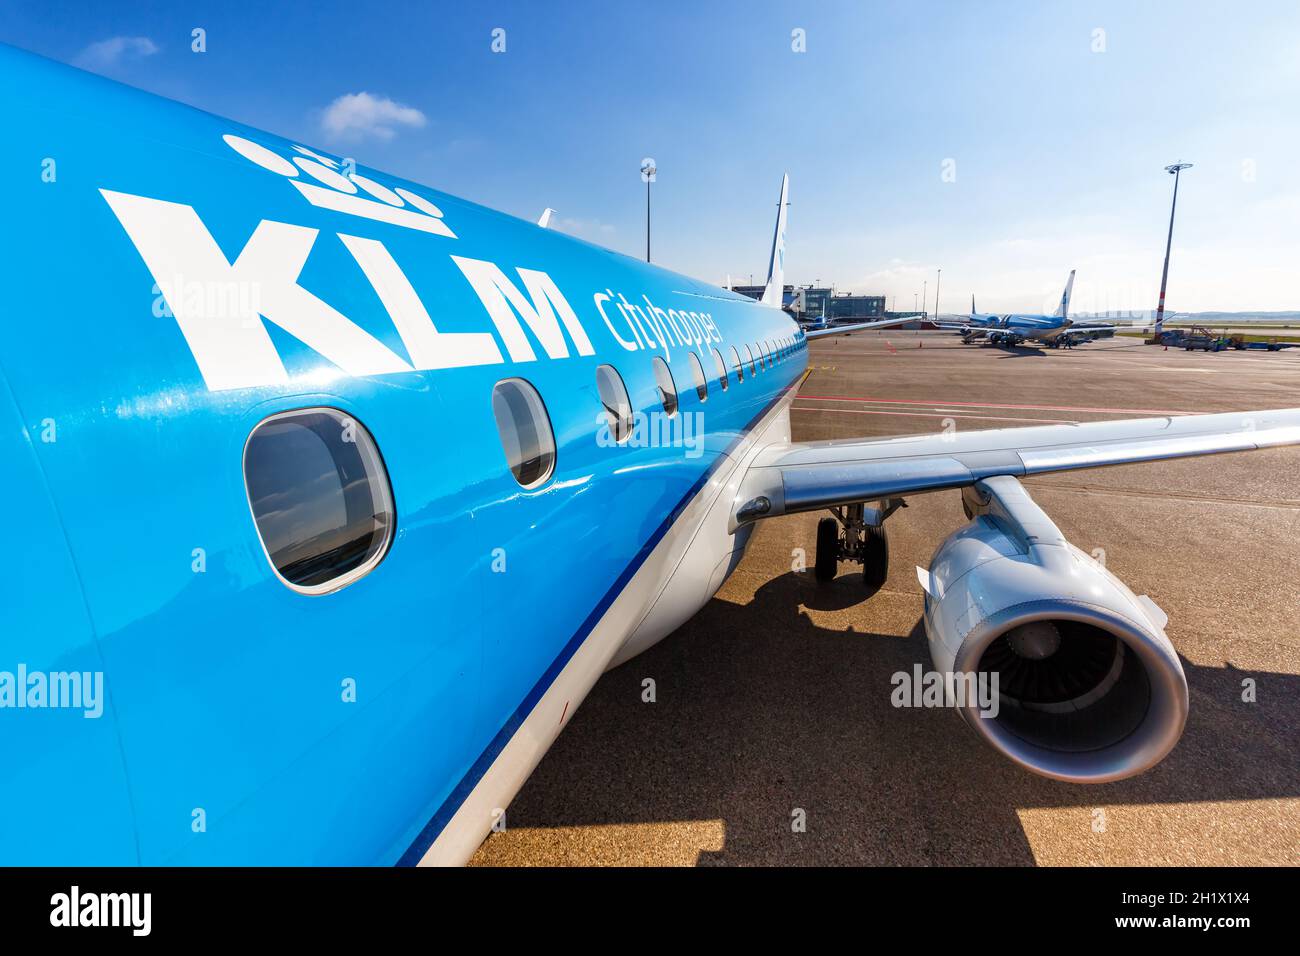 Amsterdam, Netherlands - May 29, 2021: KLM cityhopper Embraer 175 airplane at Amsterdam Schiphol airport (AMS) in the Netherlands. Stock Photo